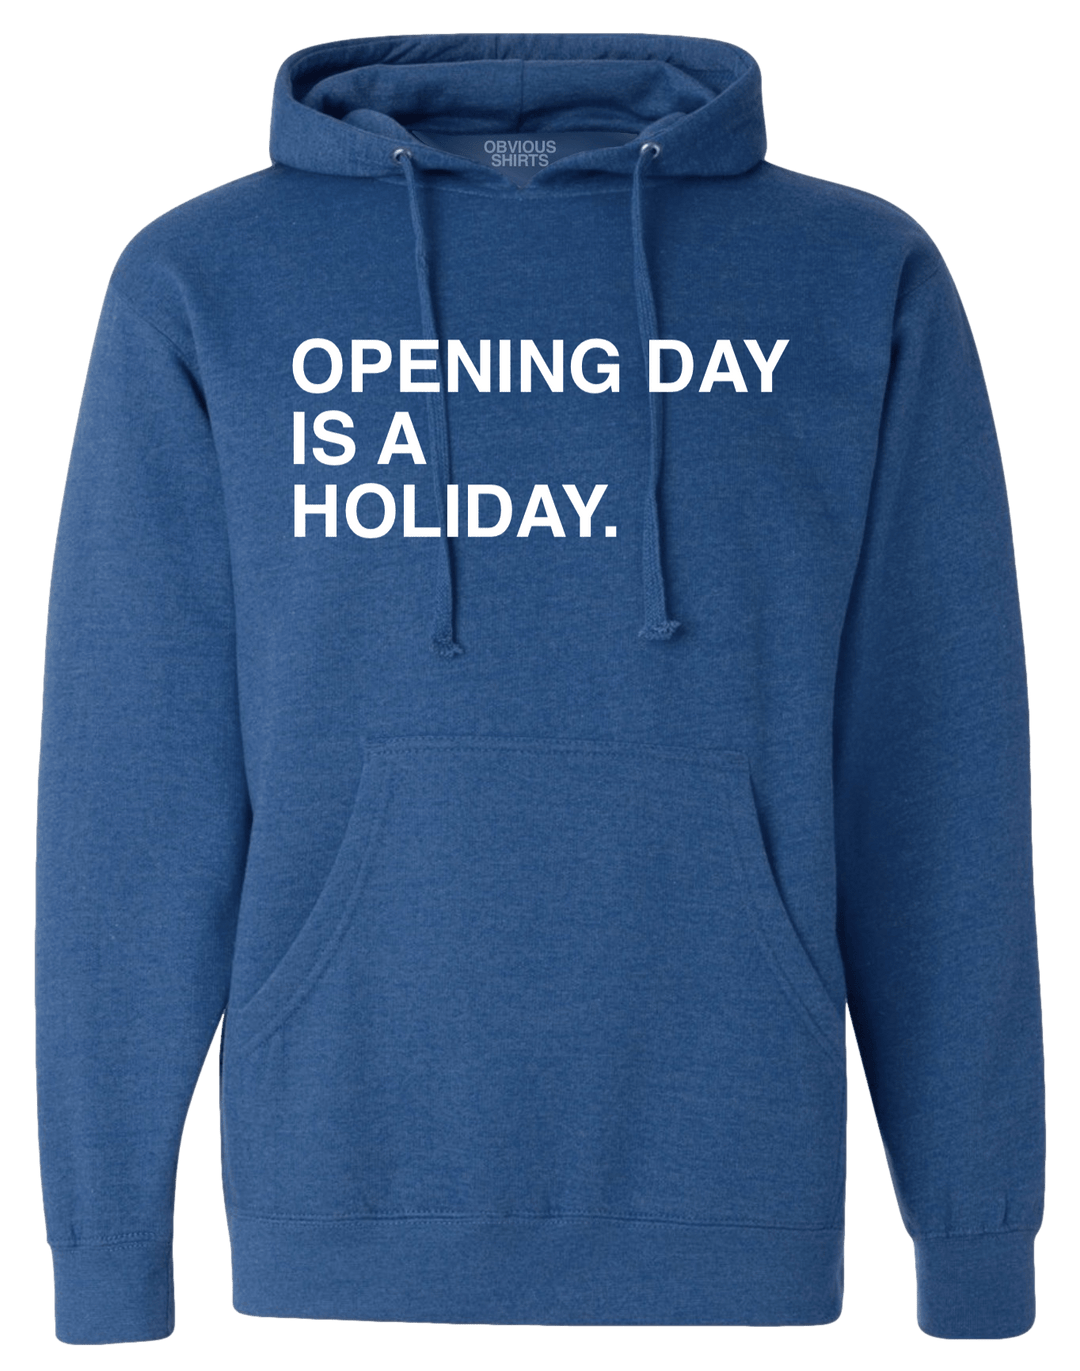 OPENING DAY IS A HOLIDAY. (HOODED SWEATSHIRT) - OBVIOUS SHIRTS